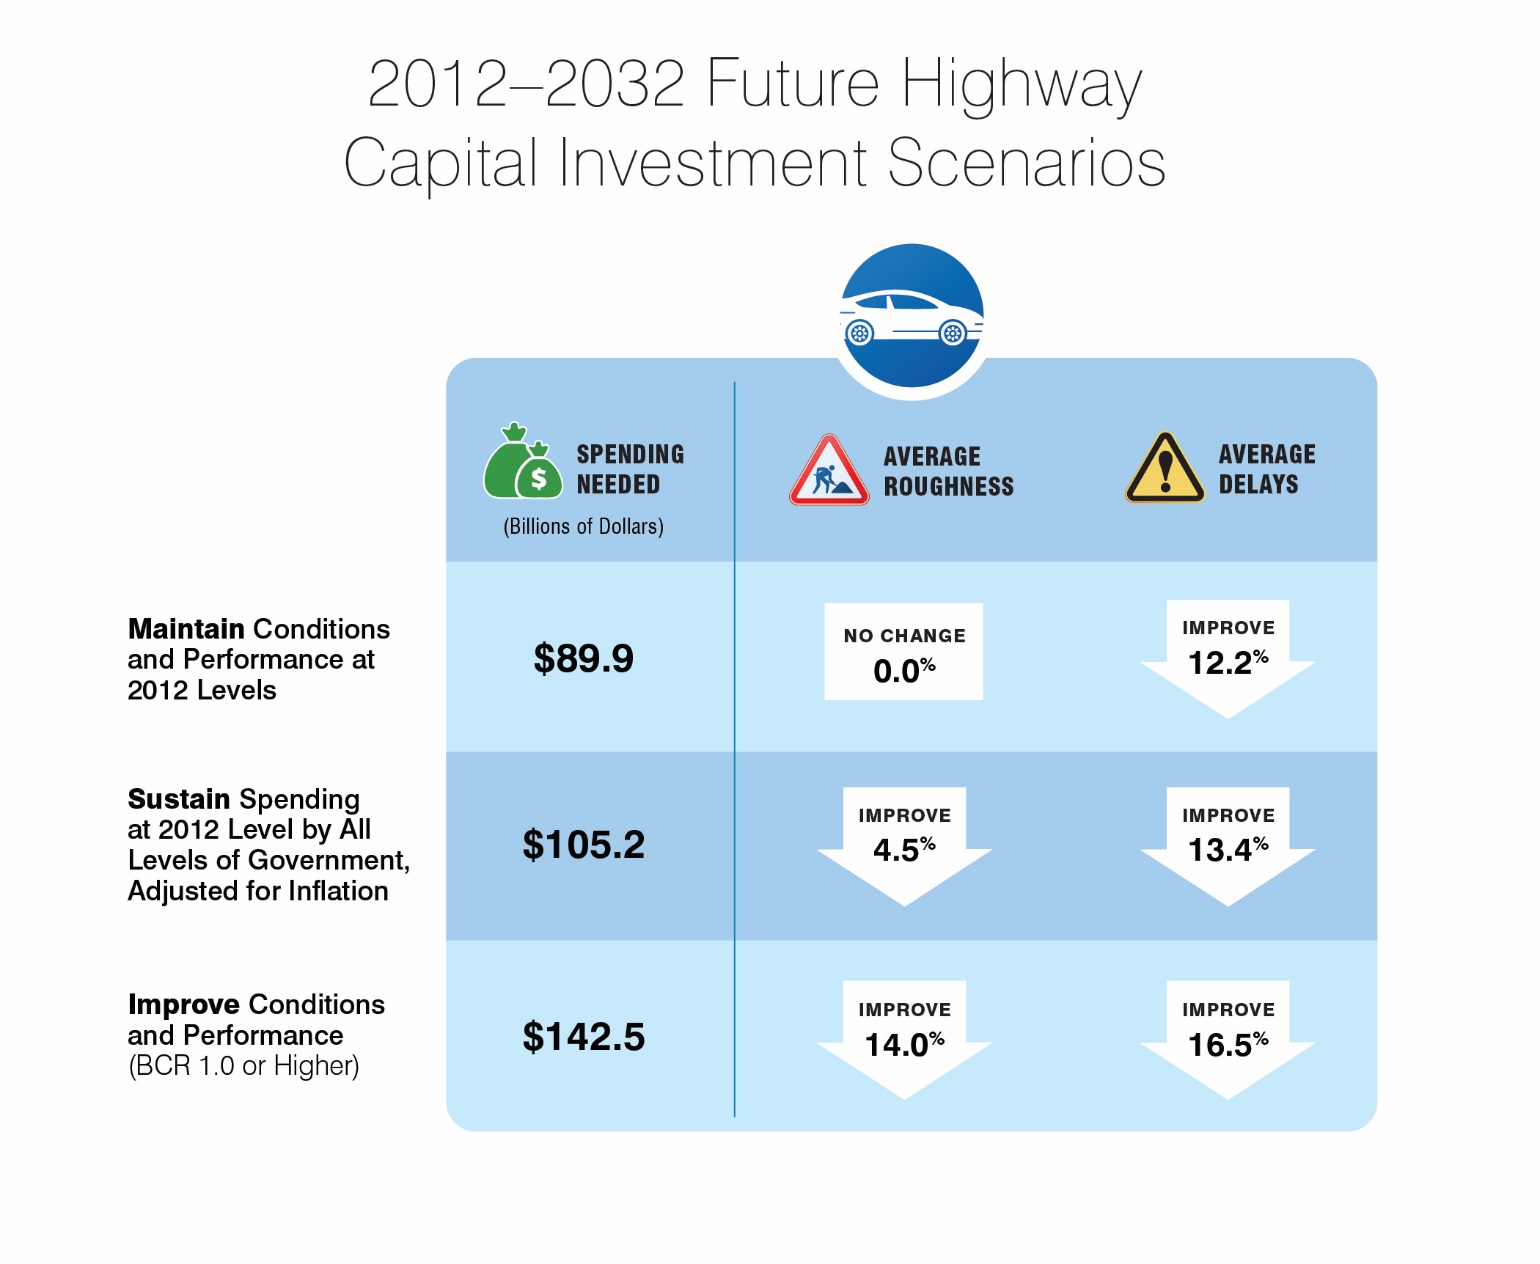 This exhibit illustrates future highway capital investment scenarios for spending needed, average roughness, and average delays under 3 scenarios: Maintain Conditions and Performance at 2012 Levels; Sustain Spending at 2012 Levels by All Levels of Government, Adjusted for Inflation; and Improve Conditions and Performance (BCR 1.0 or higher). The average annual level of investment associated with the Maintain Conditions and Performance scenario is $89.9 billion. At this level of investment, average pavement roughness on Federal-aid highways is expected to be unchanged and average delays on Federal-aid highways is projected to improve by dropping 12.2 percent . The average annual level of investment associated with the Sustain Spending scenario is  $105.2 billion. At this level of investment, average pavement roughness on Federal-aid highways is projected to improve by 4.5 percent , while average delay per VMT is projected to improve by 13.4 percent . The average annual level of investment associated with the Improve Conditions and Performance scenario is $142.5 billion. Under the Improve Conditions and Performance scenario, average pavement roughness on Federal-aid highways is projected to improve by 14.0 percent , while average delay per VMT is projected to improve by 16.5 percent .  